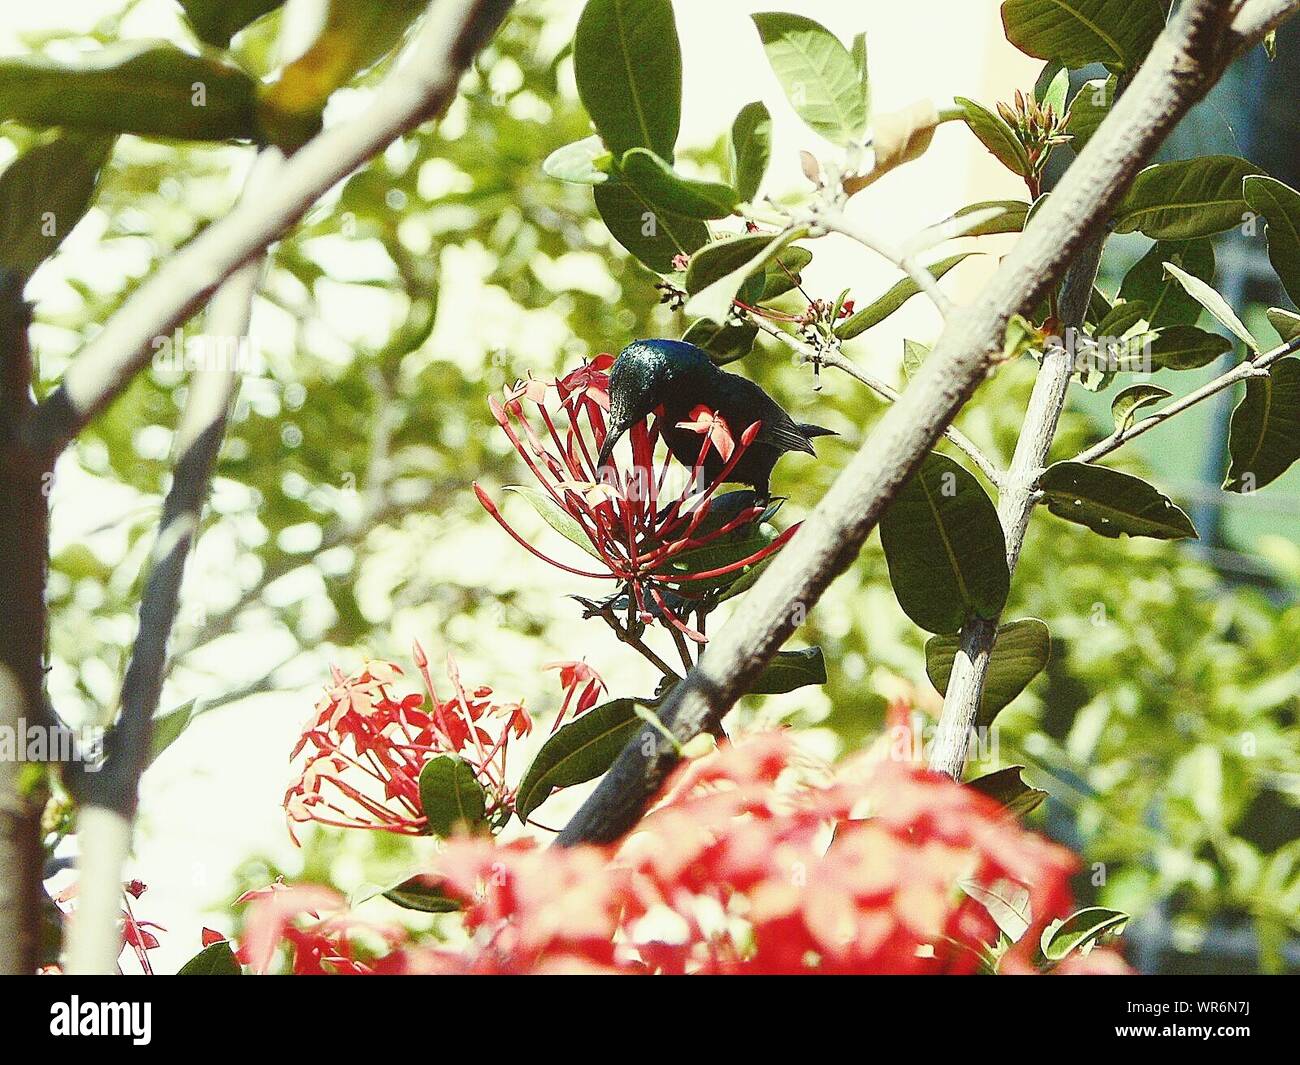 Close-up Of Bird Collecting Nectar From Flowers Stock Photo